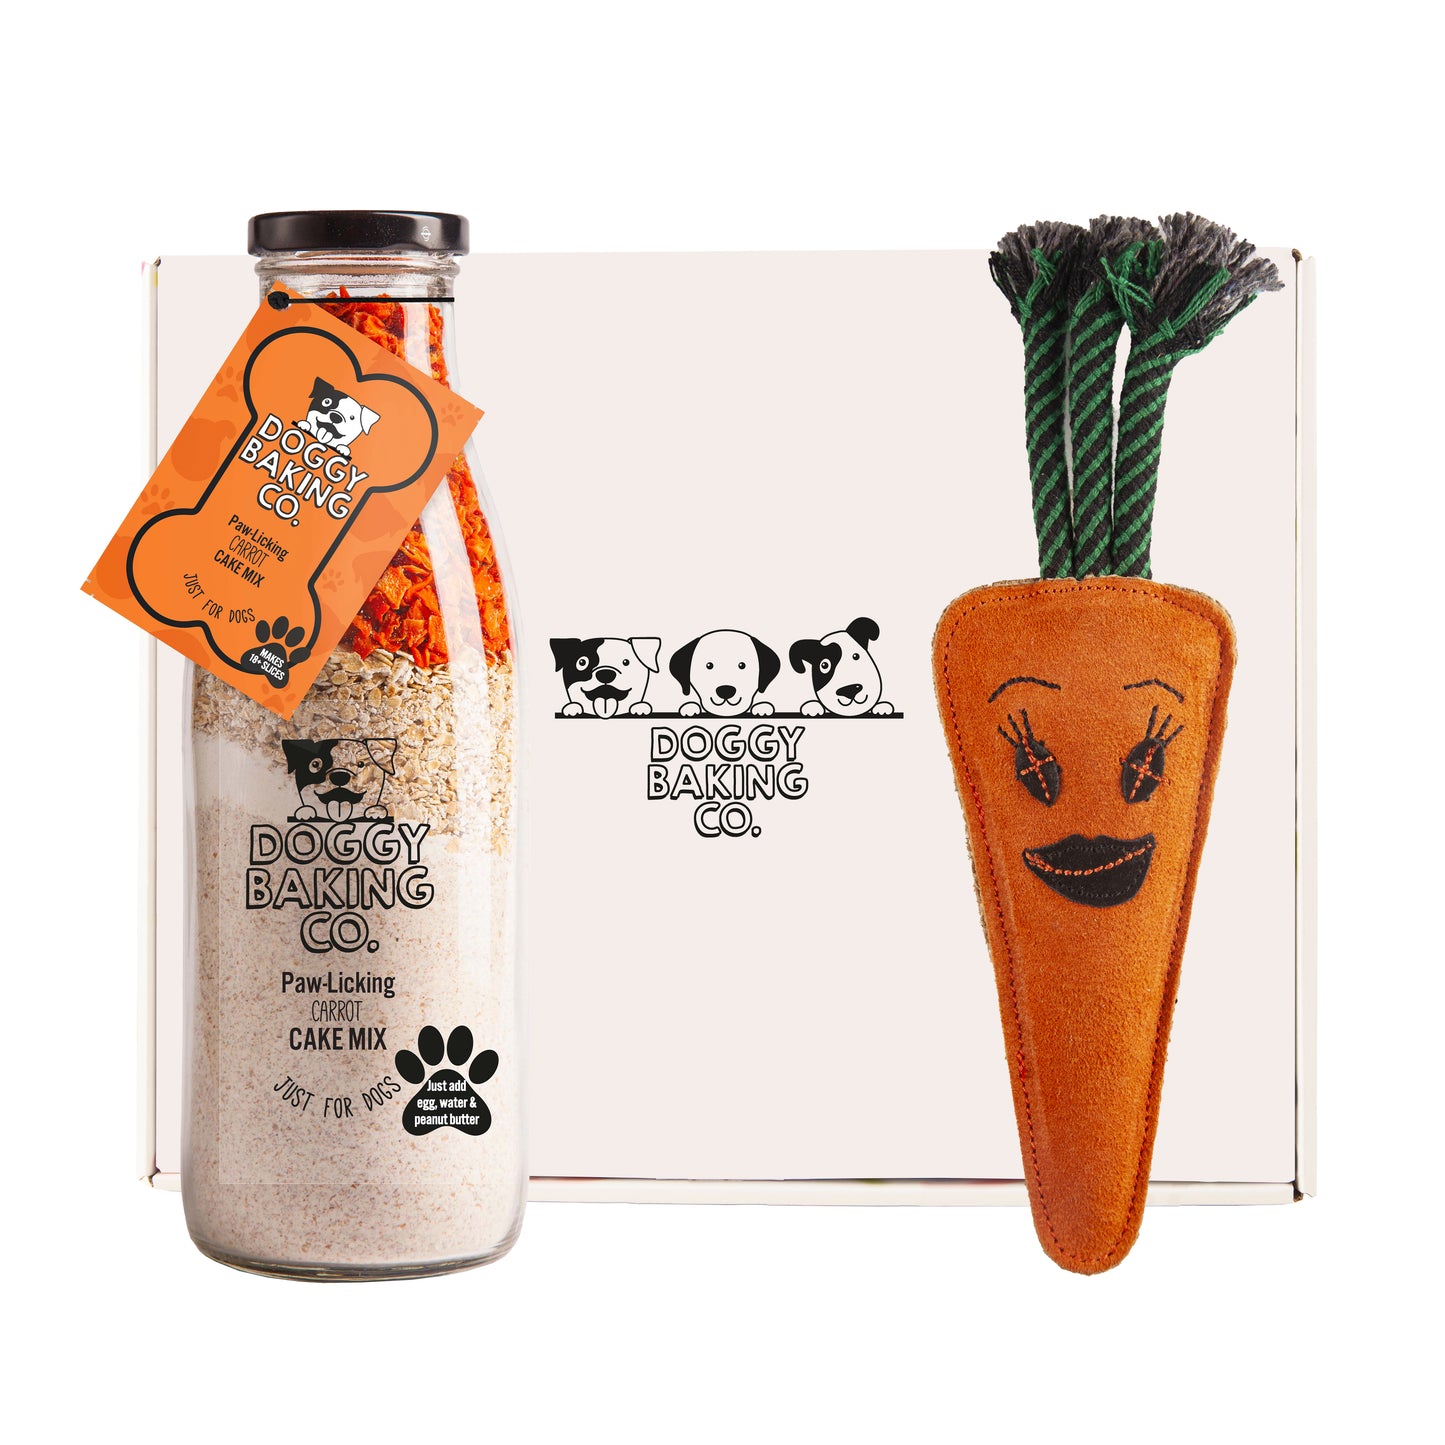 Carrot Cake Mix & Carrot Toy Gift box